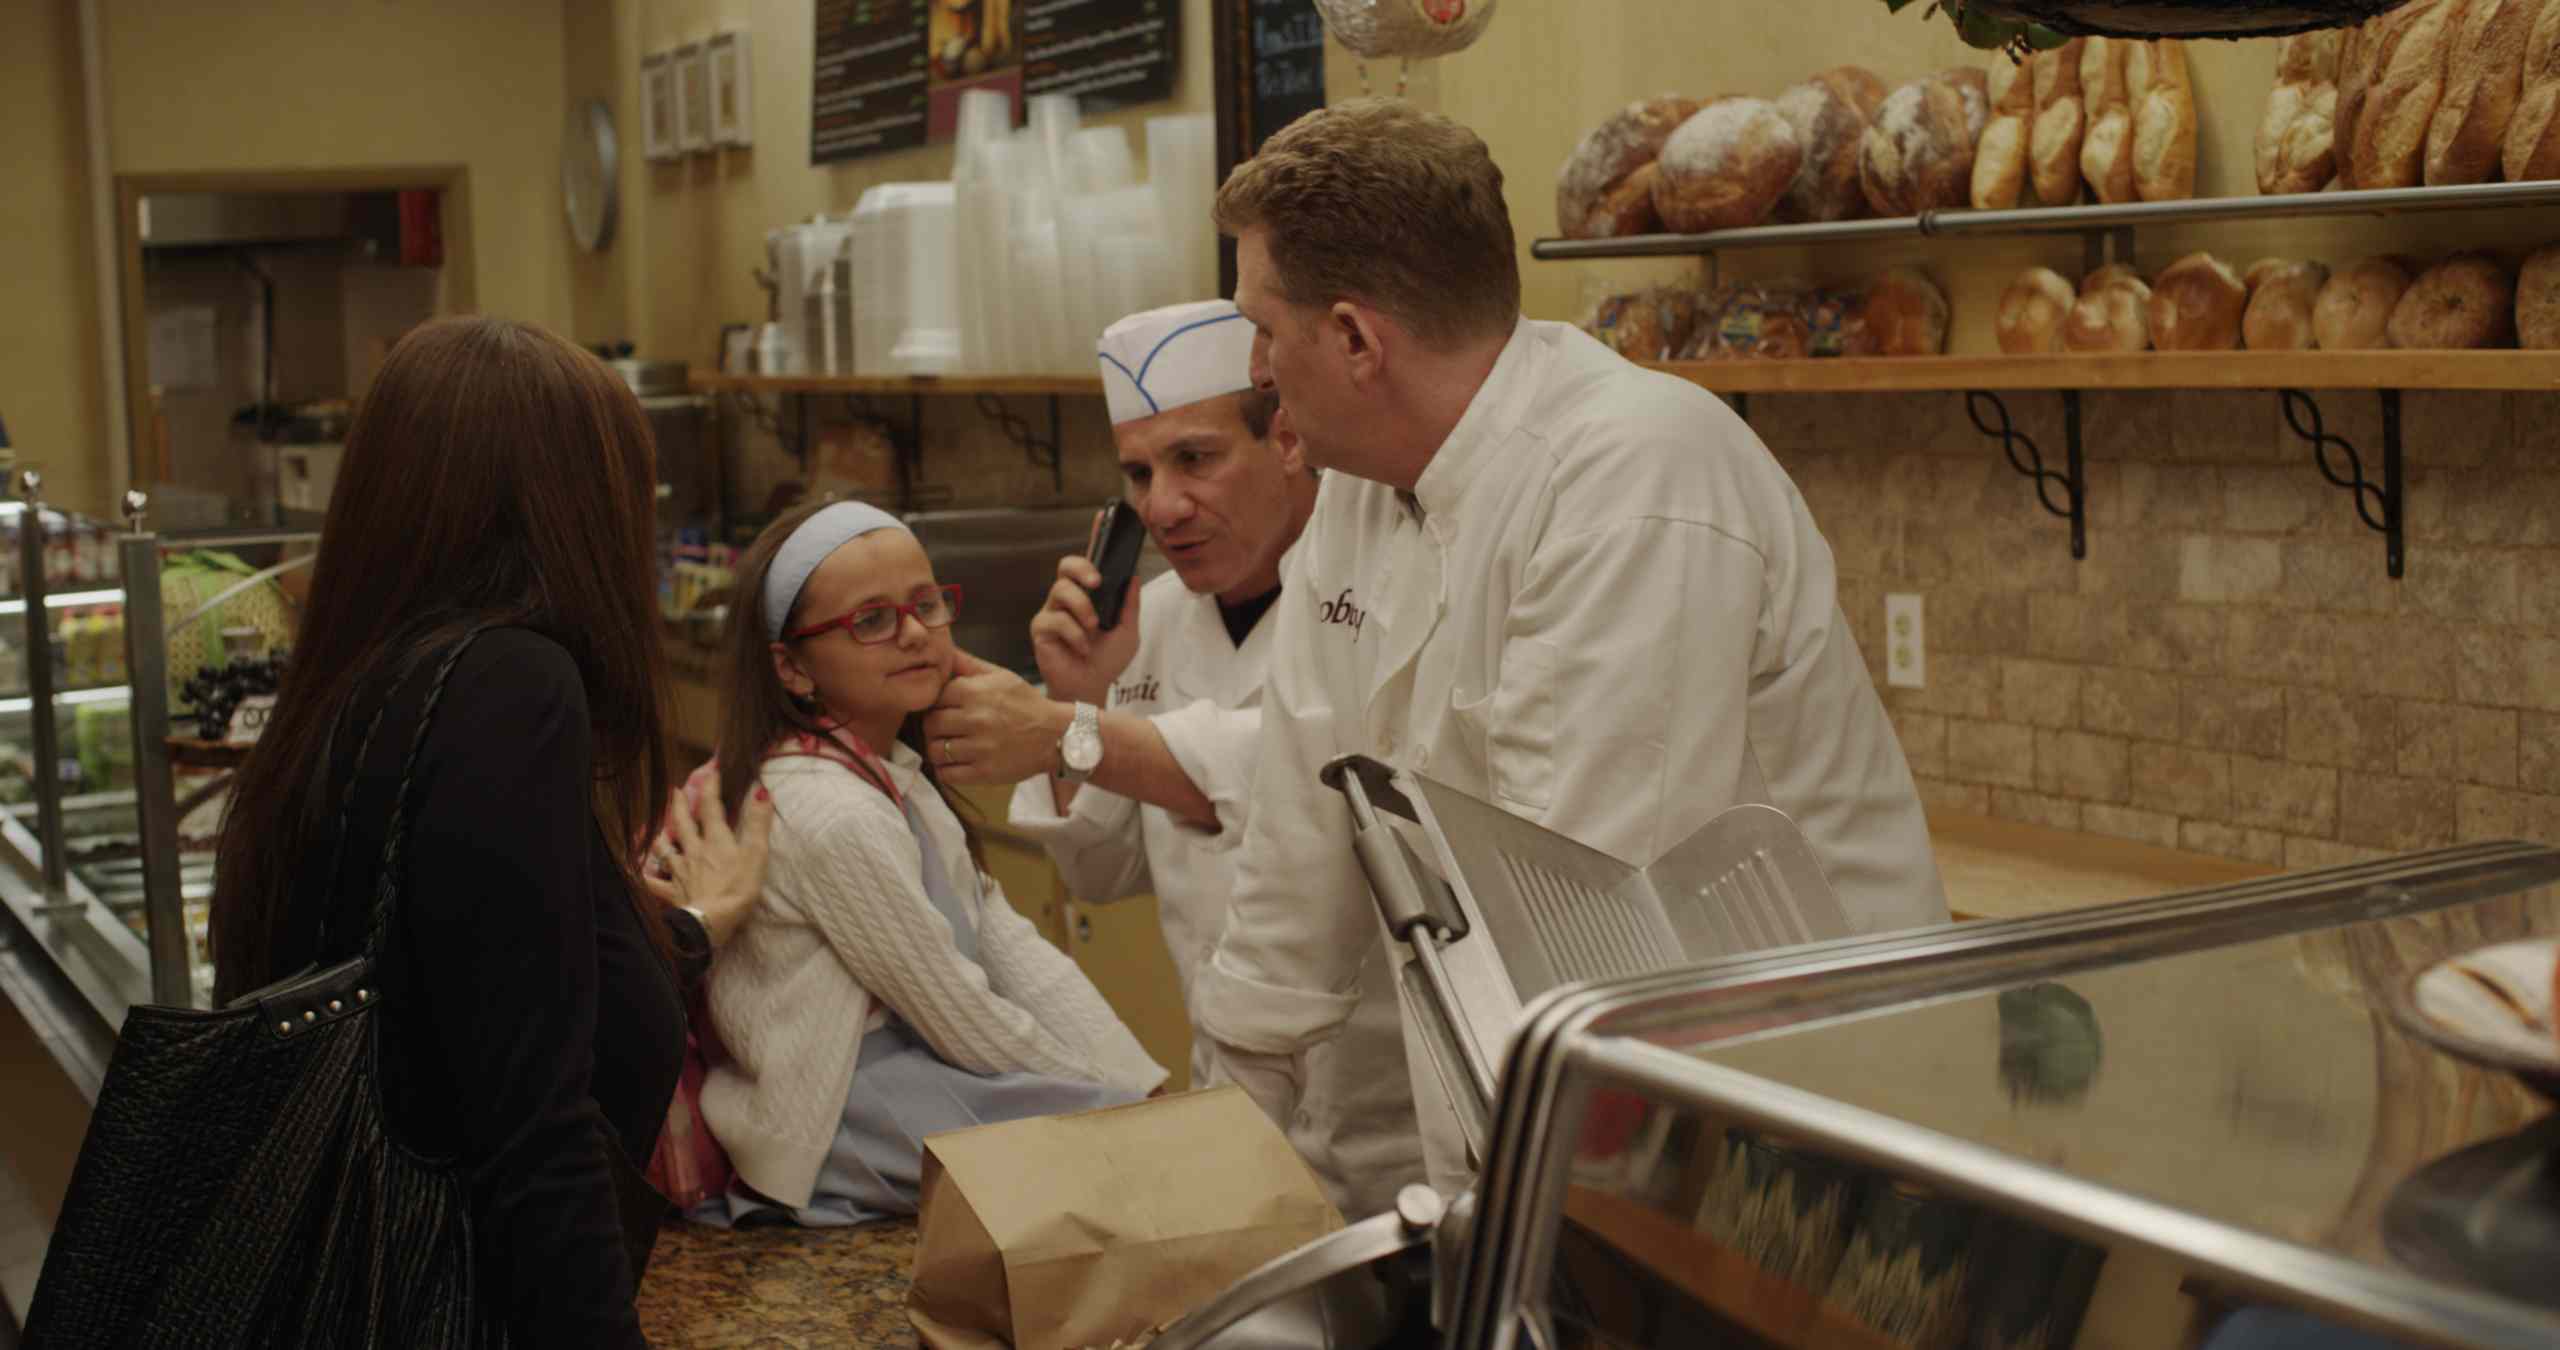 Olivia  during a scene at a Middle Village deli with actor Michael Rapaport (far right).